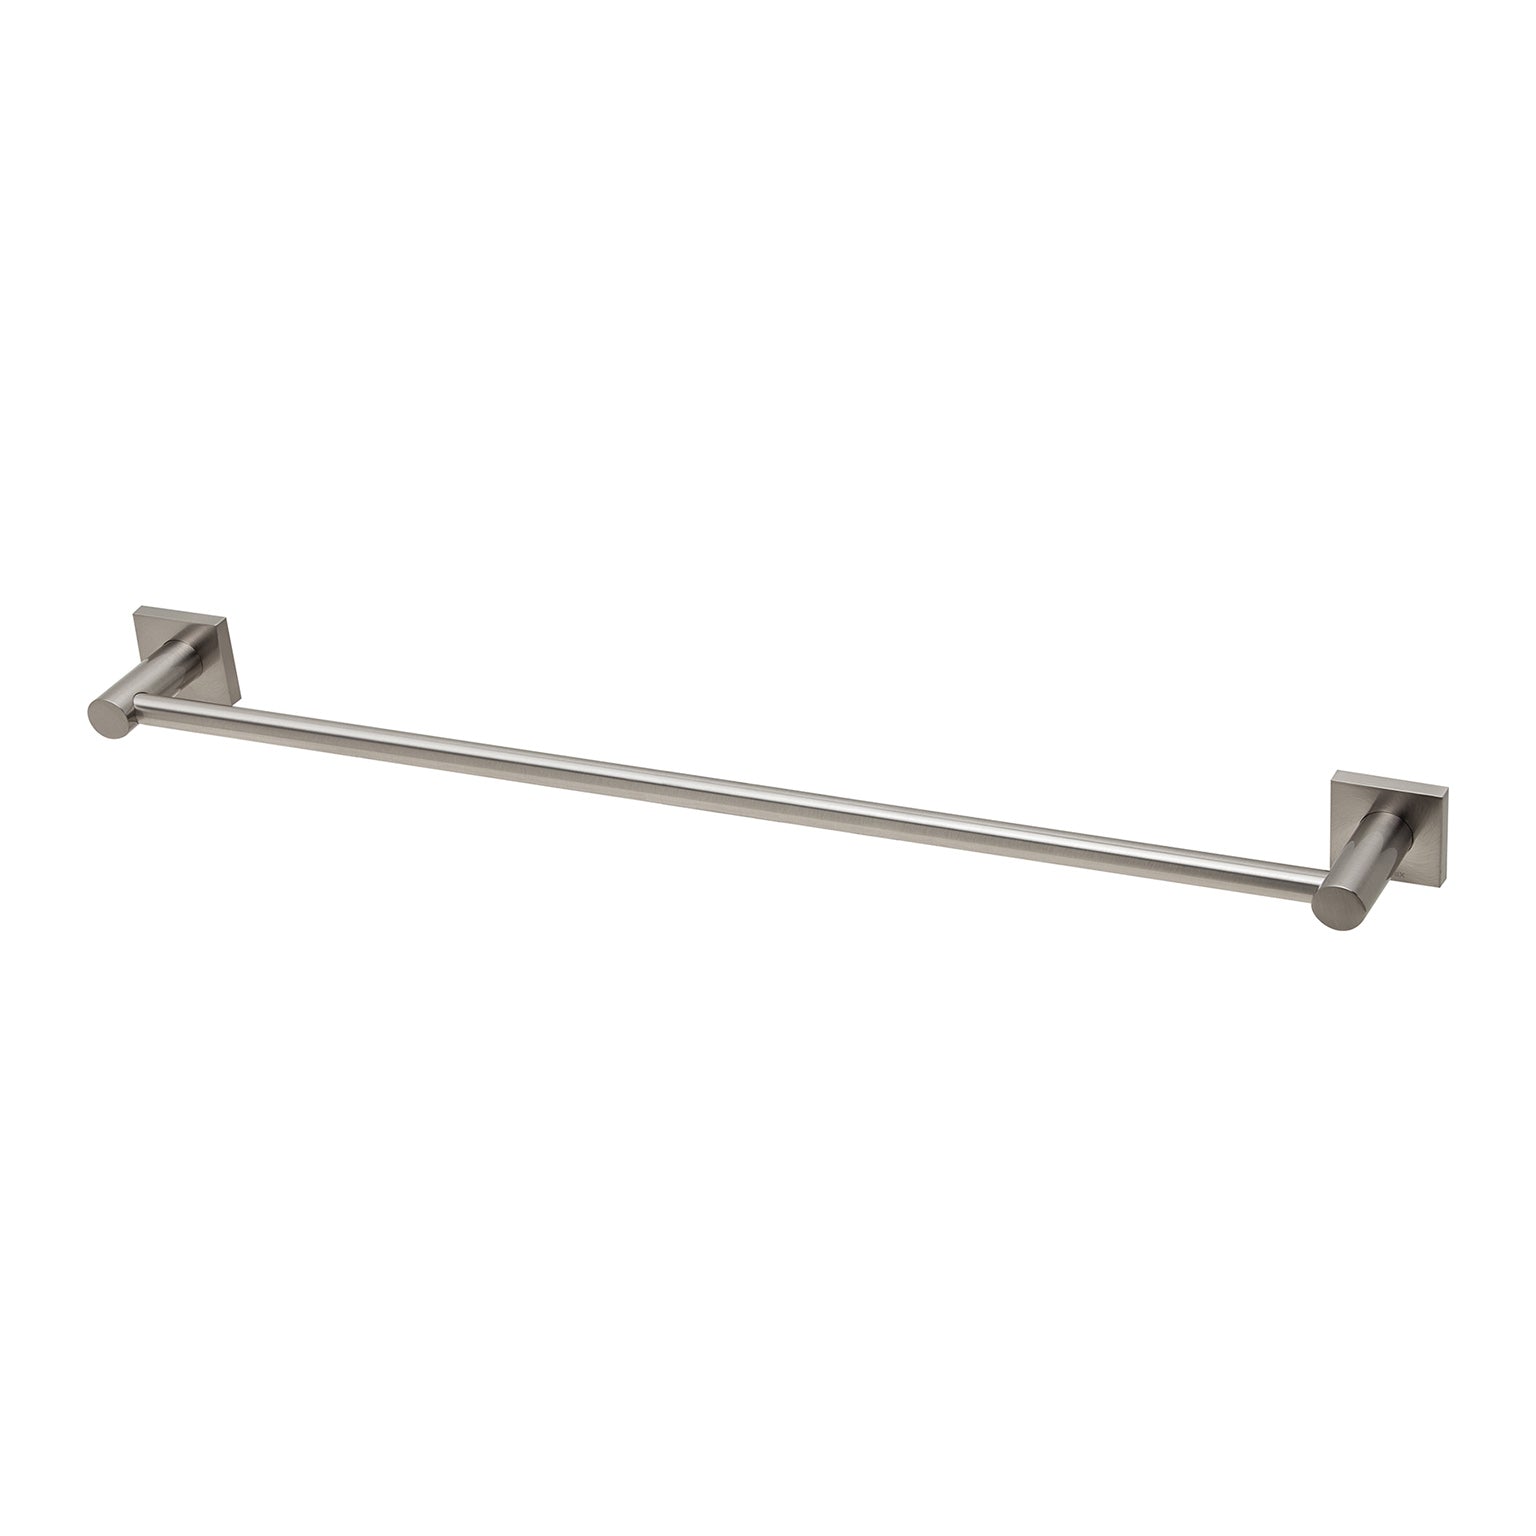 PHOENIX RADII SINGLE NON-HEATED TOWEL RAIL SQUARE BRUSHED NICKEL 600MM AND 800MM